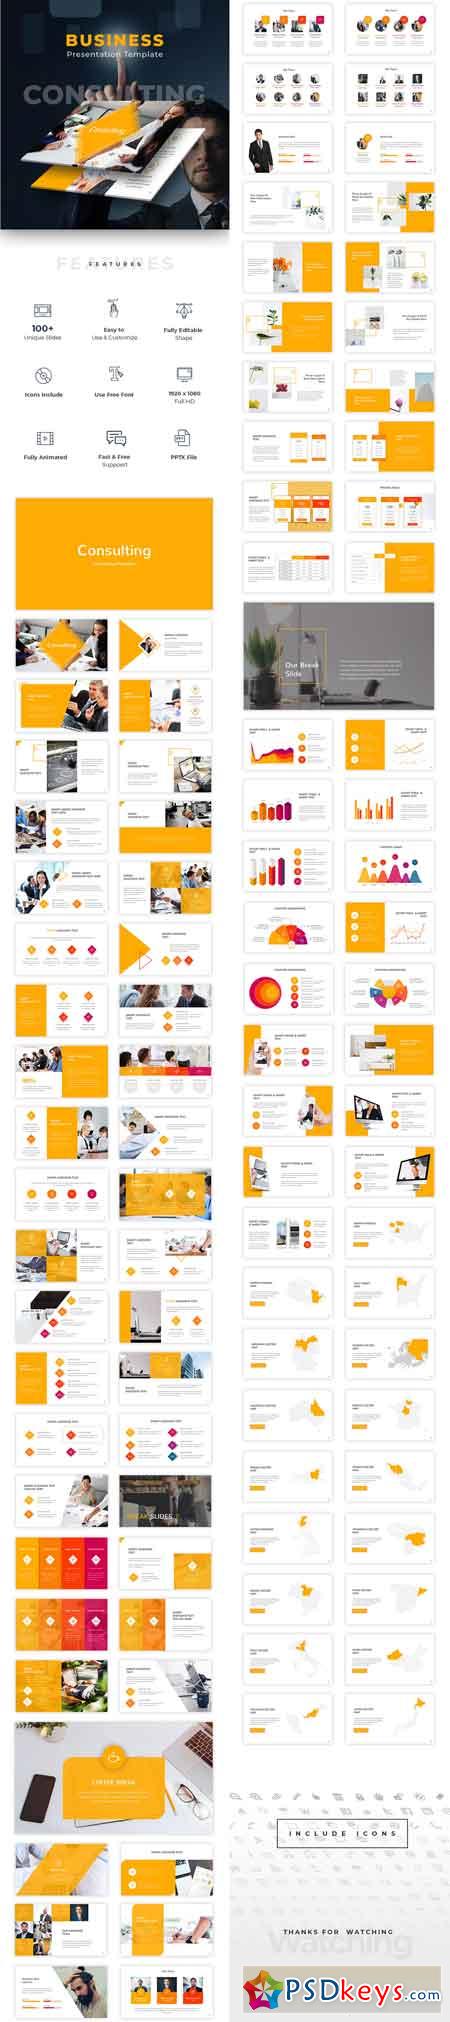 Business Consulting Powerpoint 22597797